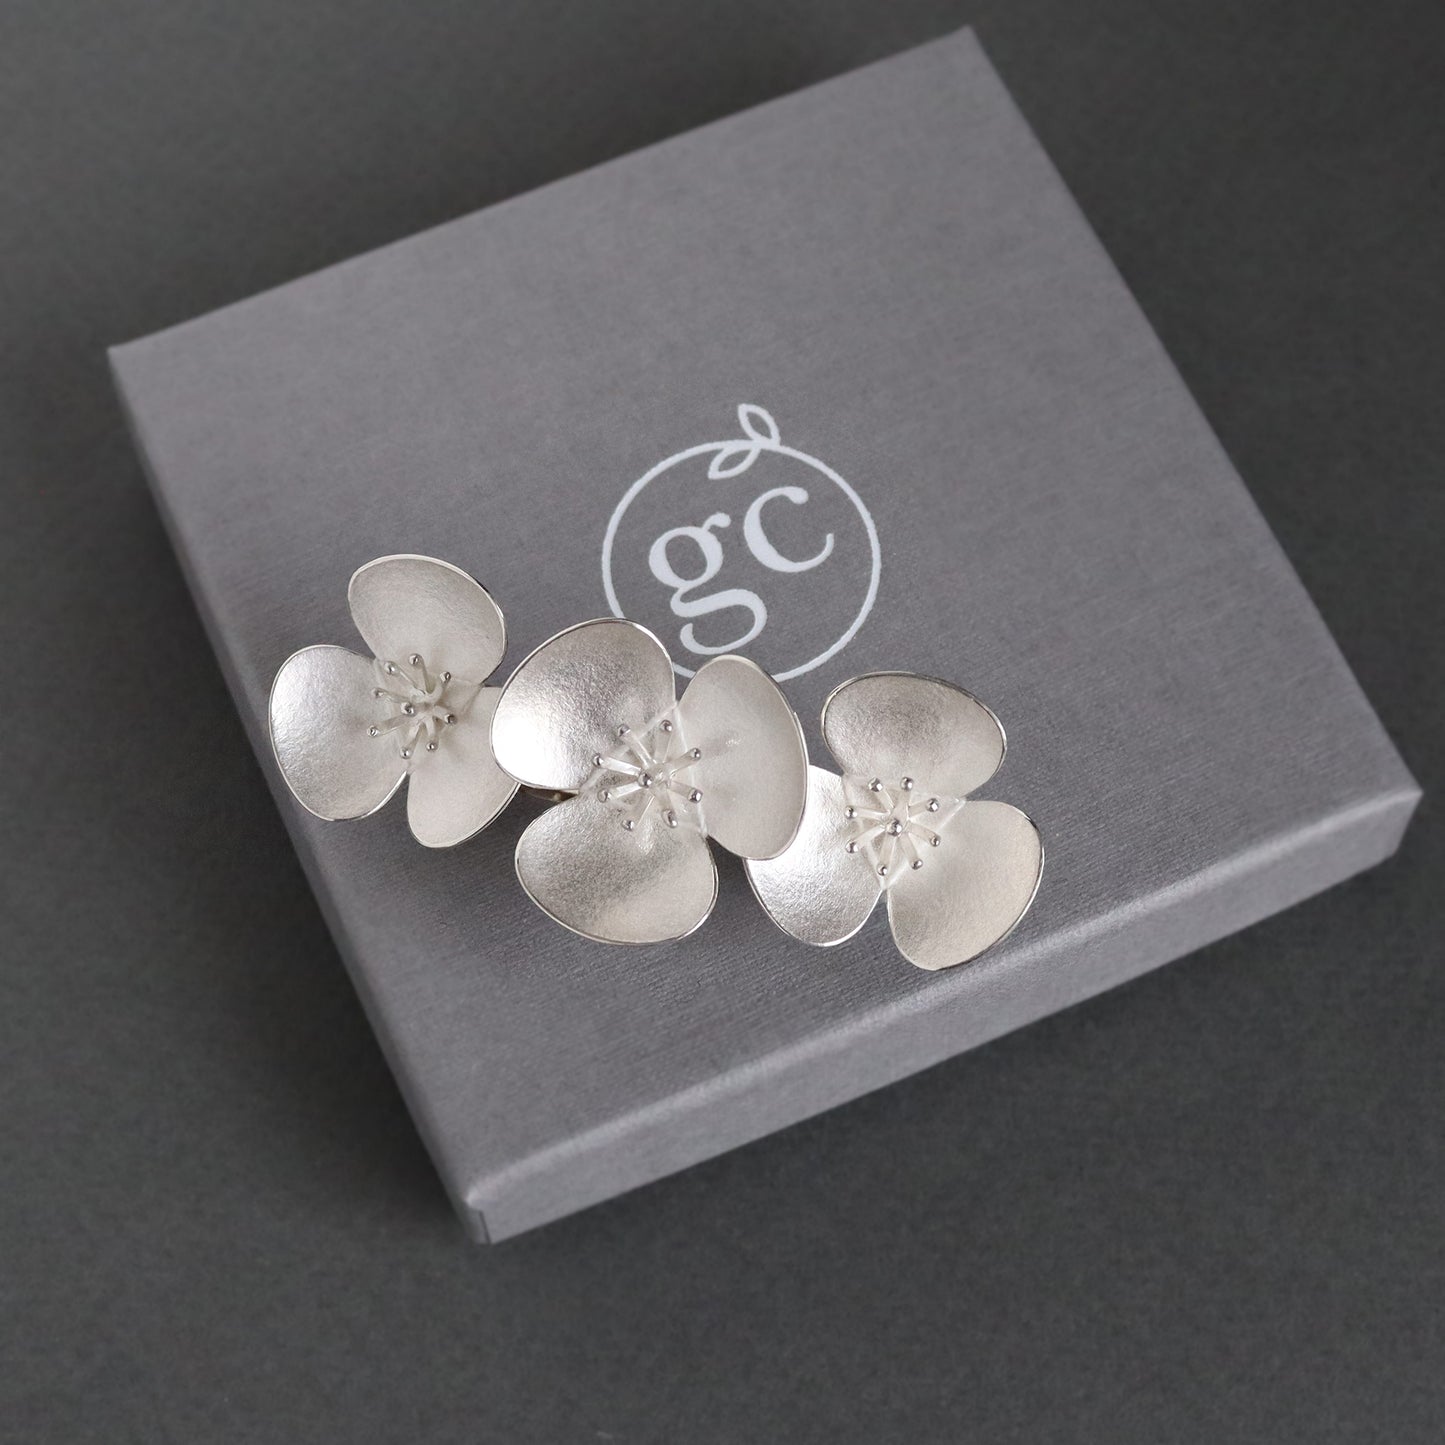 Three Silver Poppies Bridal Barette Hairclip, which instantly convert to a set of jewellery